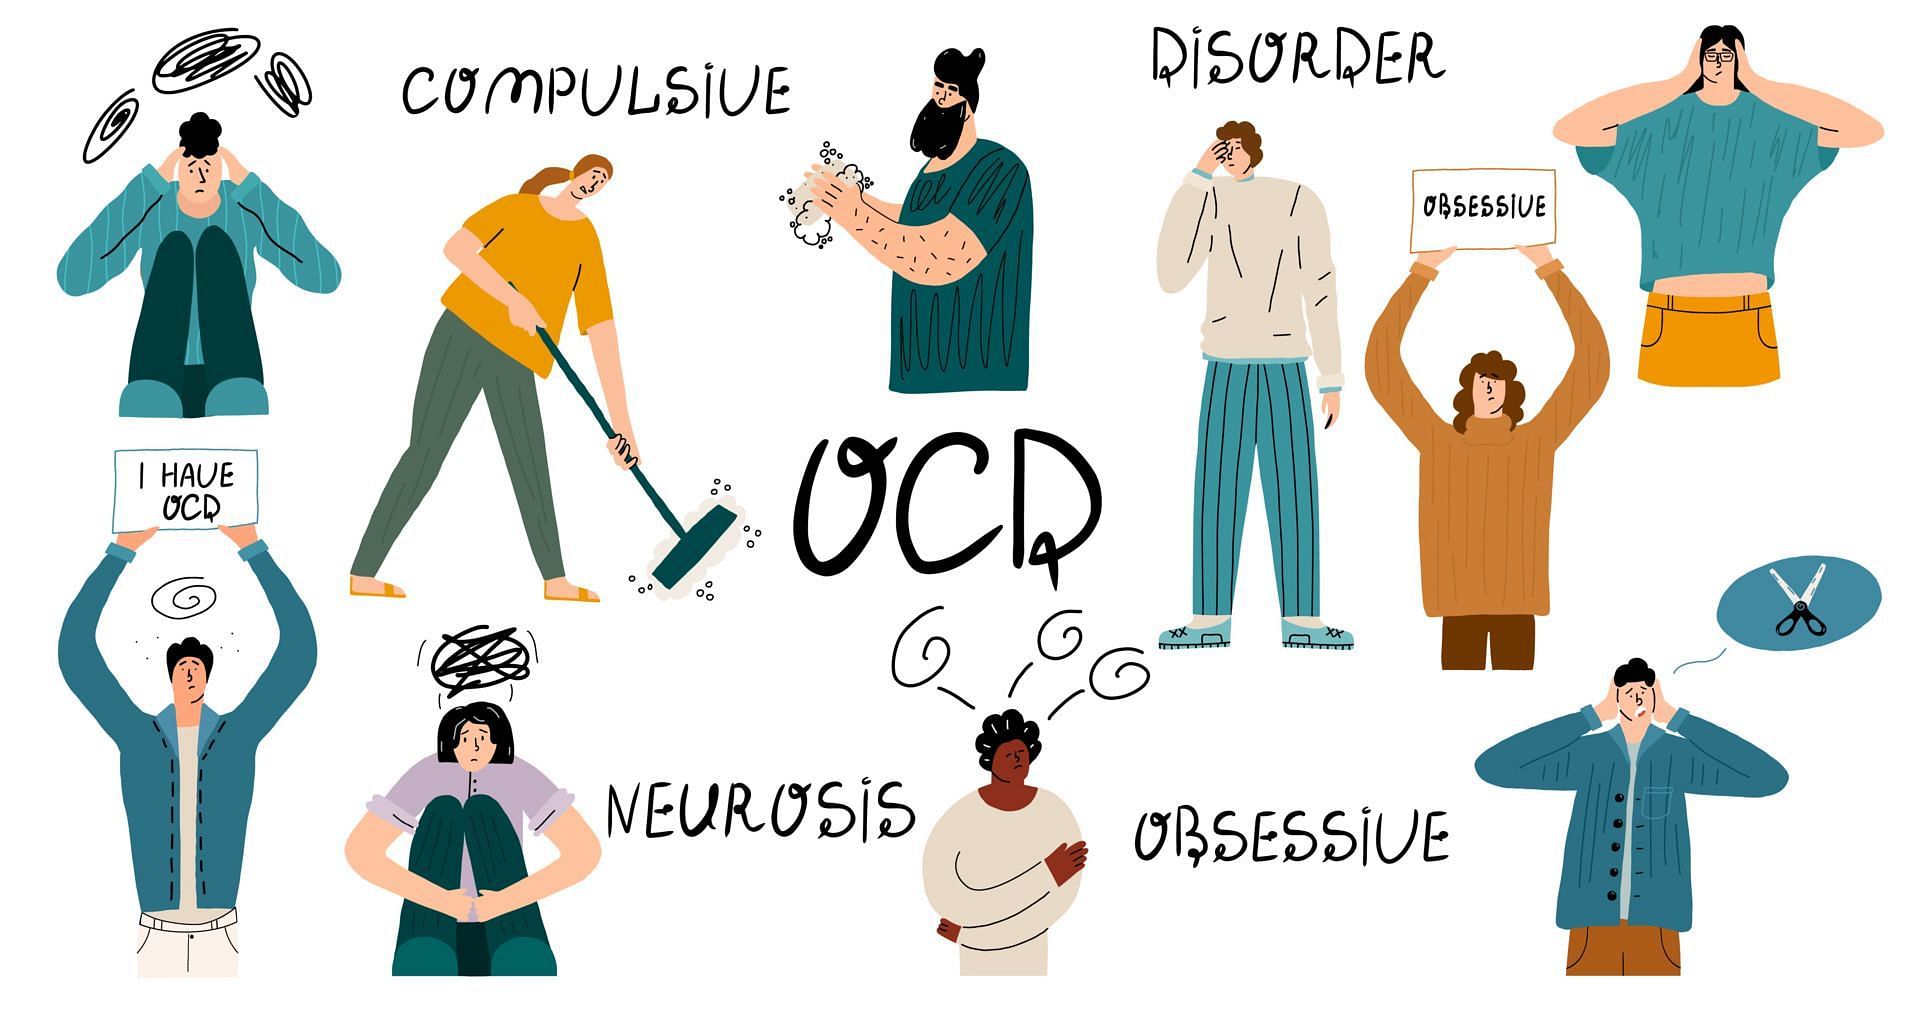 There are many types of OCD that we recognize now. (Image via Vecteezy/ Aliaksandra Savich)